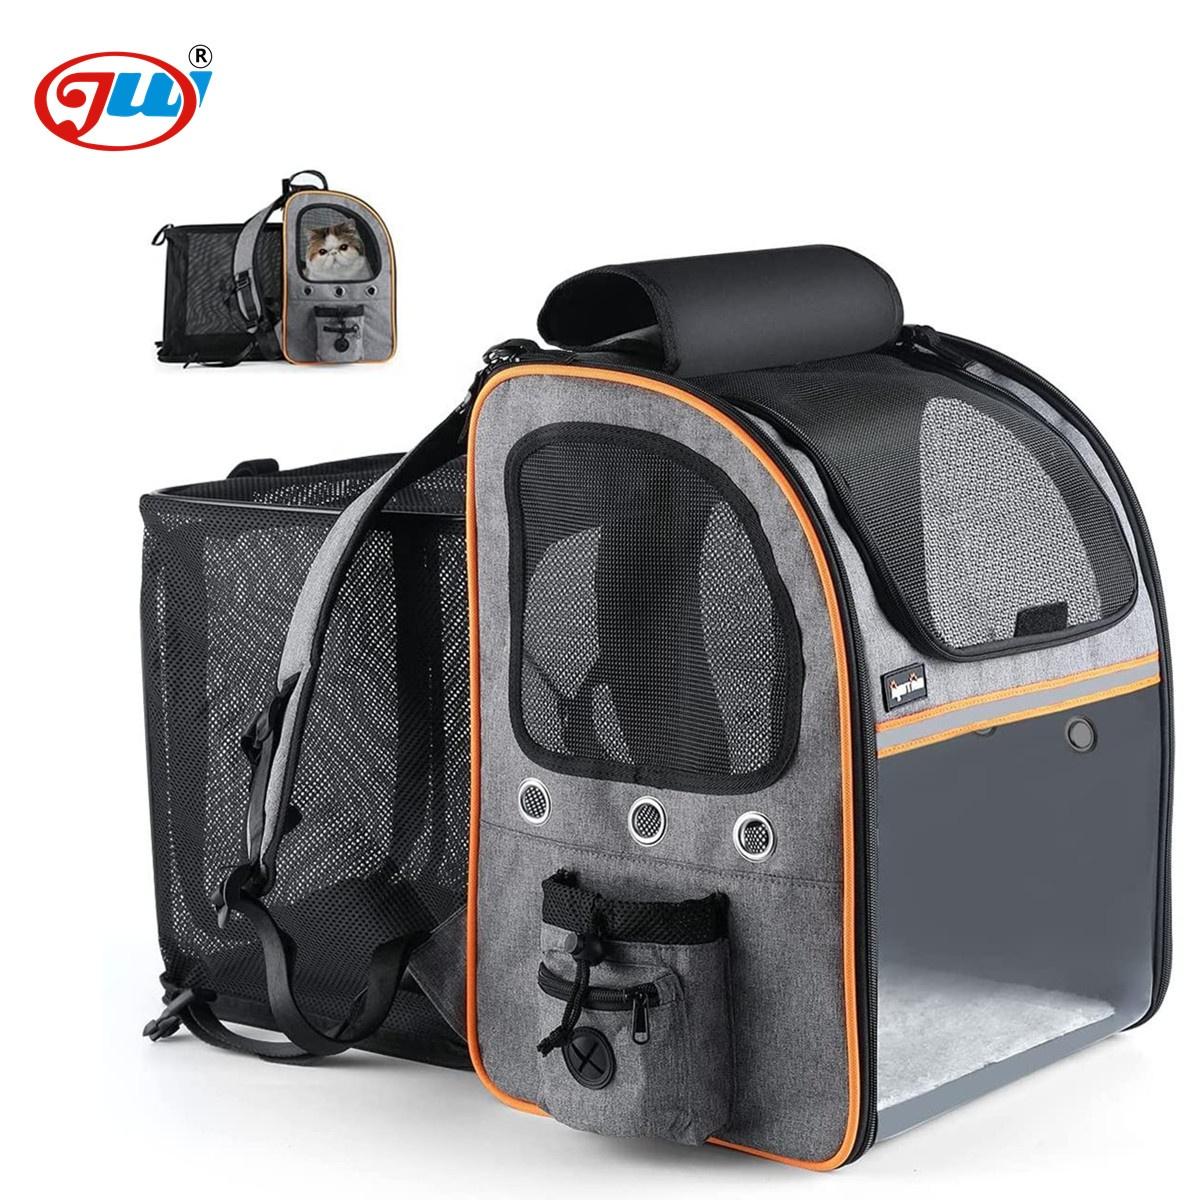 Fit Up To 18 Lbs Pet Travel Bag Expandable Cat Pet Carrier Dog Backpack For Cats Dogs Small Animals